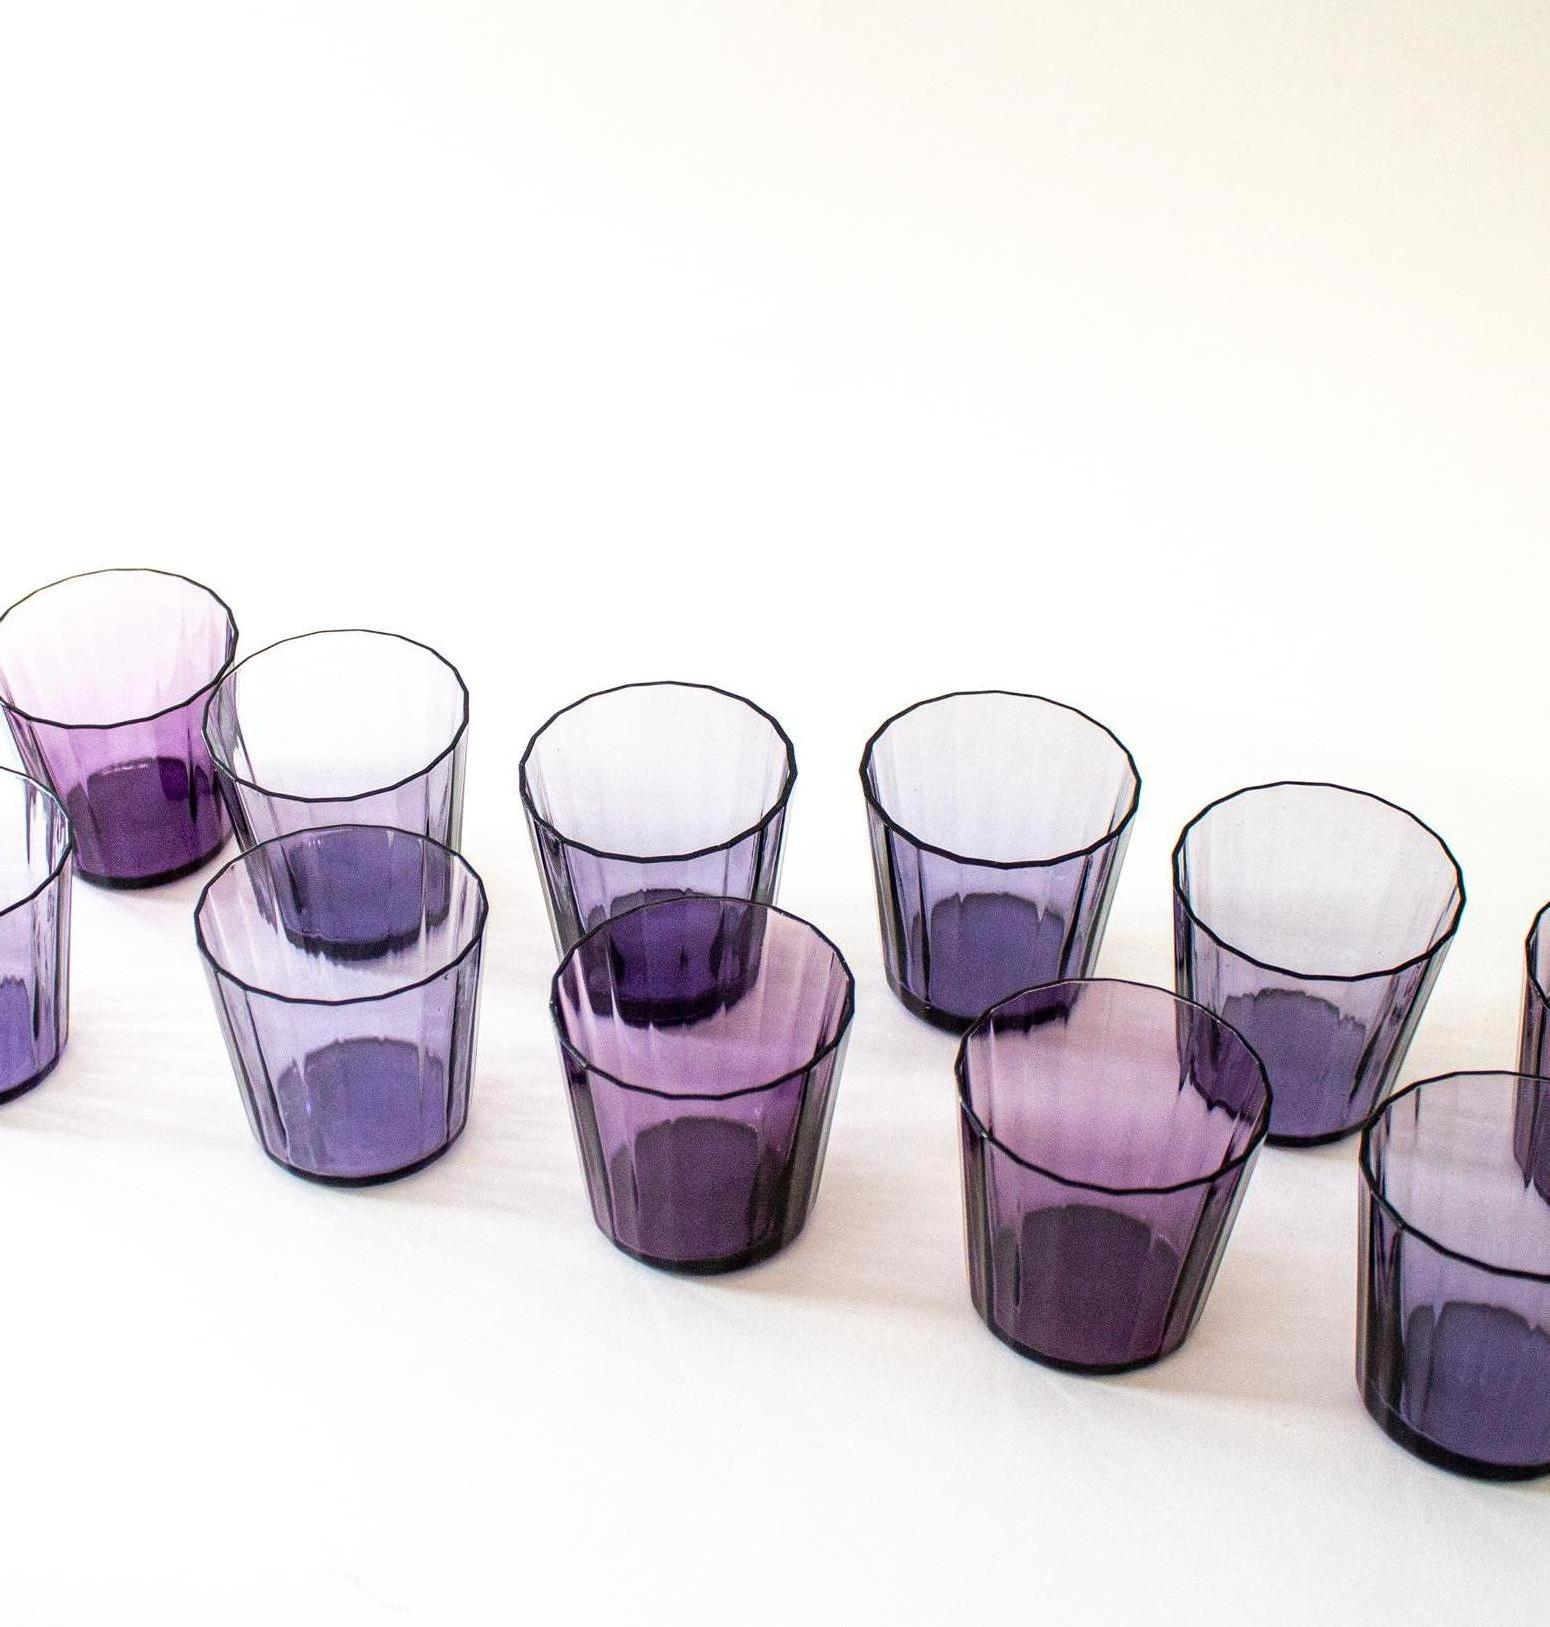 12 Facet Swedish Art Deco Sherry Glasses in Lilac and Blue In Good Condition For Sale In Stockholm, SE